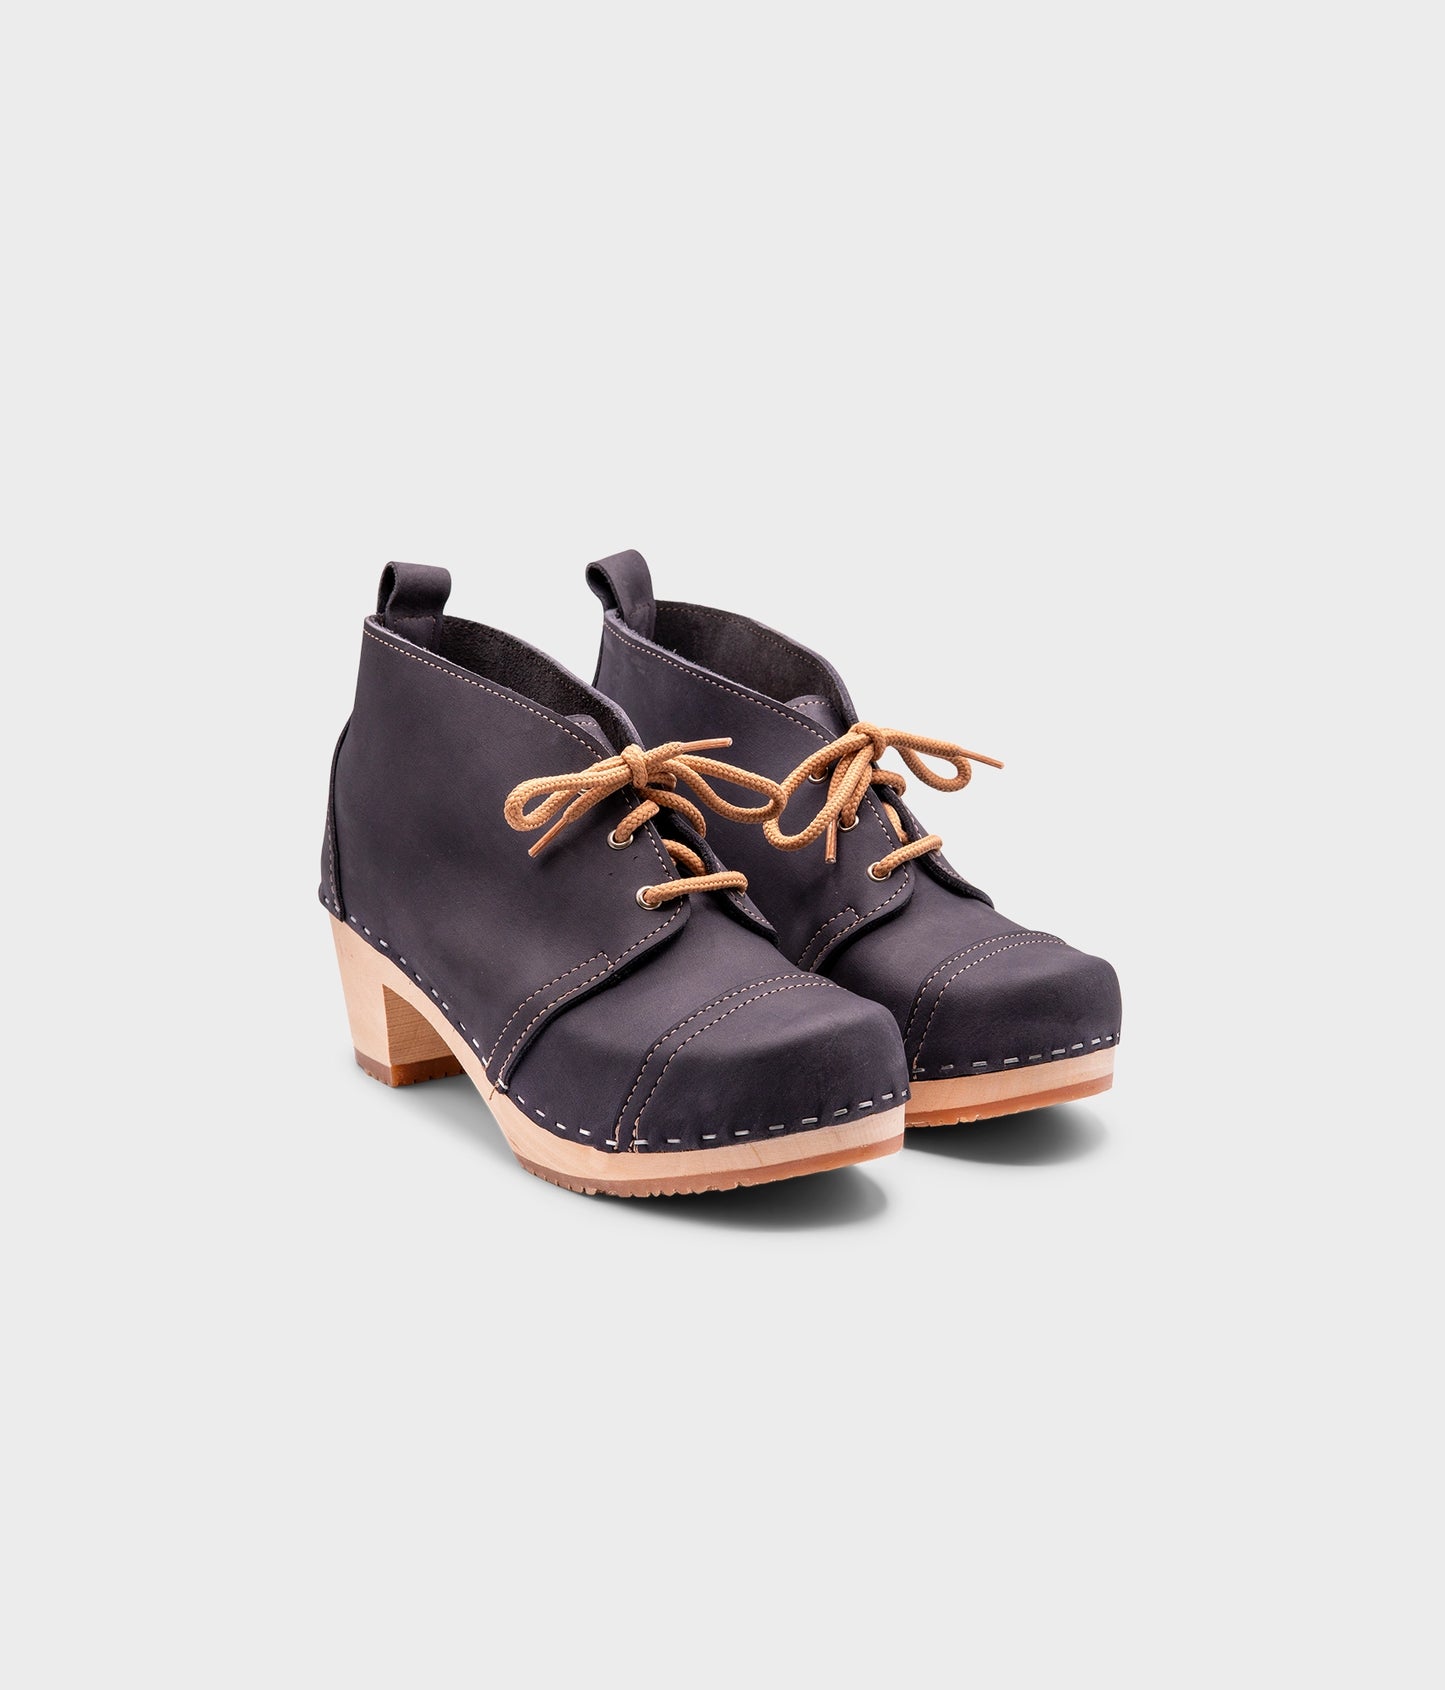 high heeled chukka clog boots in navy blue nubuck leather stapled on a light wooden base with beige laces